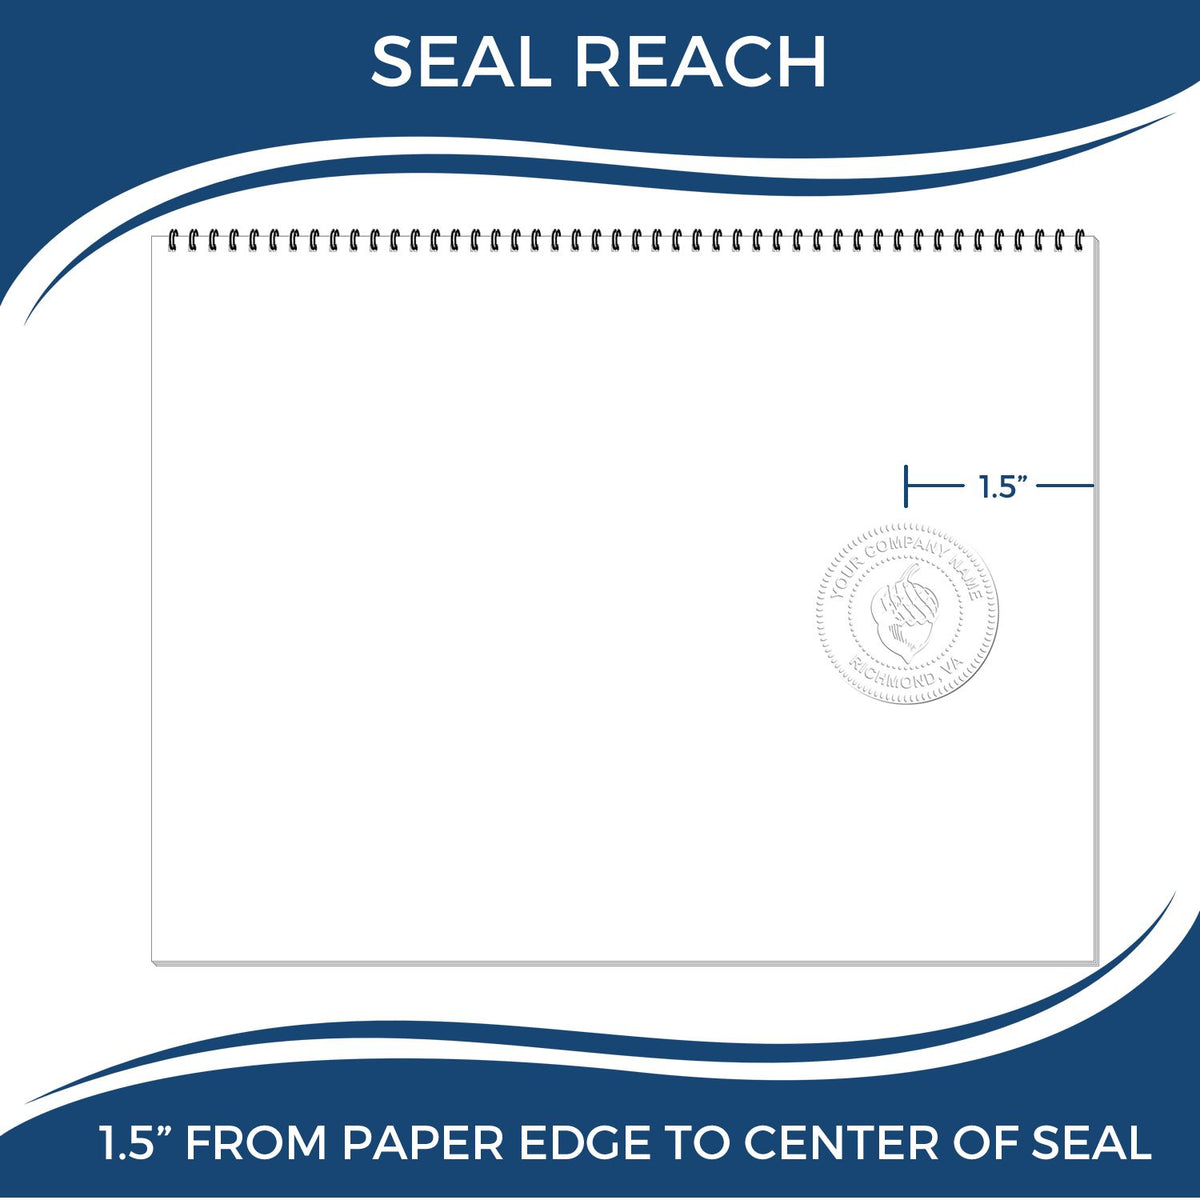 An infographic showing the seal reach which is represented by a ruler and a miniature seal image of the Soft Pennsylvania Professional Engineer Seal